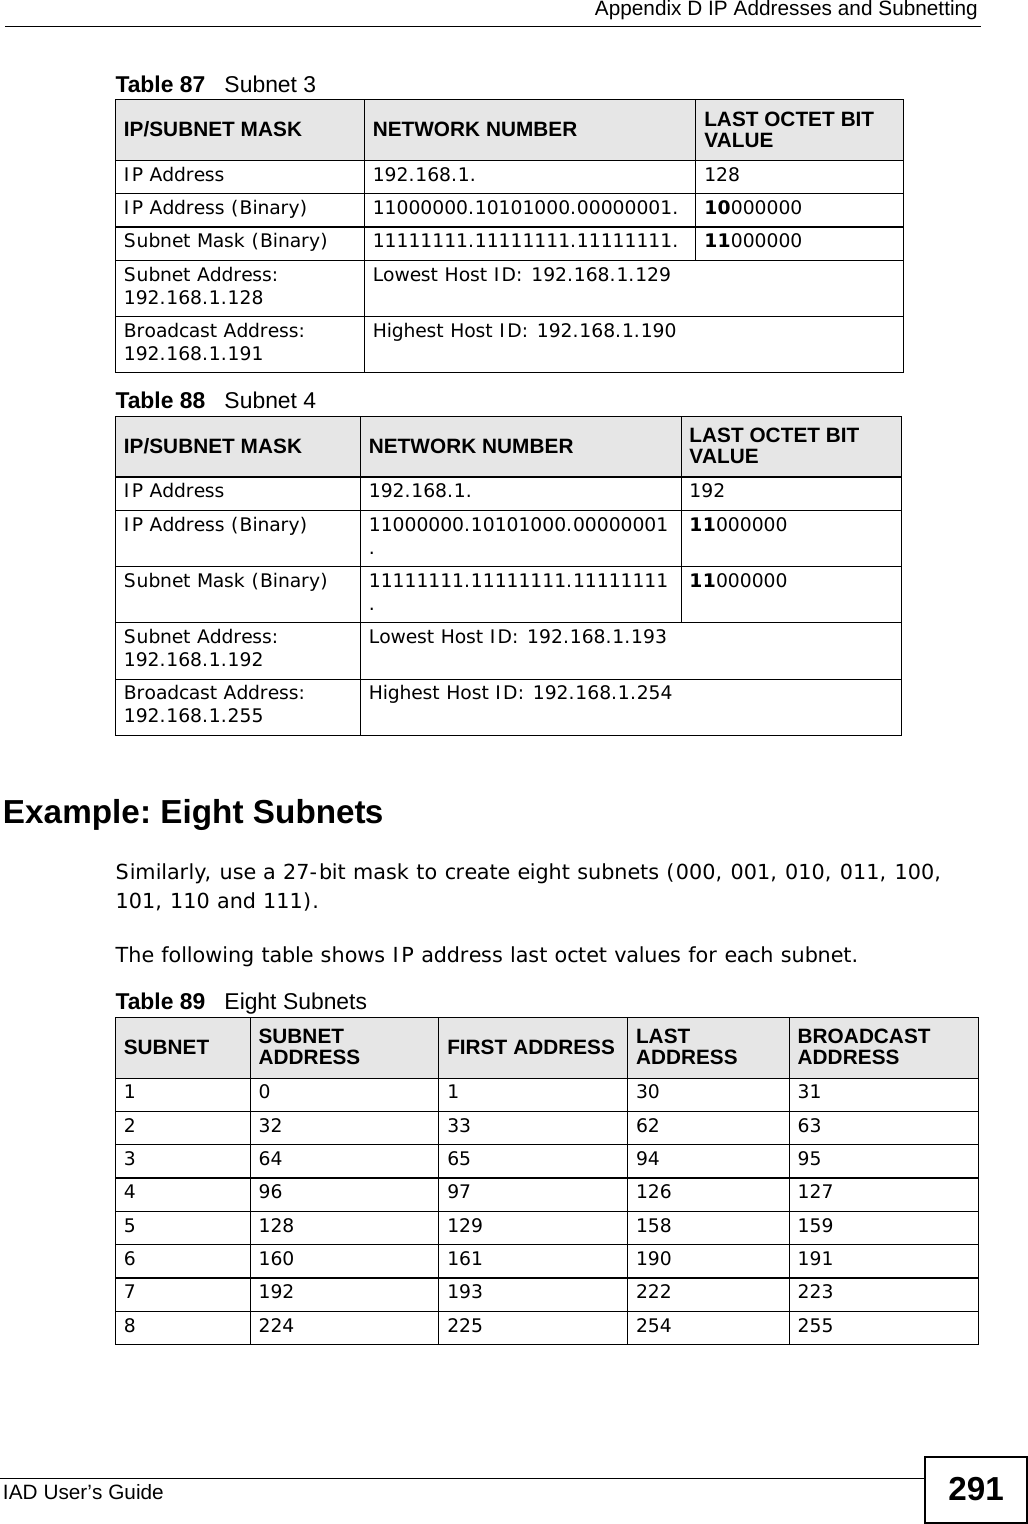  Appendix D IP Addresses and SubnettingIAD User’s Guide 291Example: Eight SubnetsSimilarly, use a 27-bit mask to create eight subnets (000, 001, 010, 011, 100, 101, 110 and 111). The following table shows IP address last octet values for each subnet.Table 87   Subnet 3IP/SUBNET MASK NETWORK NUMBER LAST OCTET BIT VALUEIP Address 192.168.1. 128IP Address (Binary) 11000000.10101000.00000001. 10000000Subnet Mask (Binary) 11111111.11111111.11111111. 11000000Subnet Address: 192.168.1.128 Lowest Host ID: 192.168.1.129Broadcast Address: 192.168.1.191 Highest Host ID: 192.168.1.190Table 88   Subnet 4IP/SUBNET MASK NETWORK NUMBER LAST OCTET BIT VALUEIP Address 192.168.1. 192IP Address (Binary) 11000000.10101000.00000001. 11000000Subnet Mask (Binary) 11111111.11111111.11111111. 11000000Subnet Address: 192.168.1.192 Lowest Host ID: 192.168.1.193Broadcast Address: 192.168.1.255 Highest Host ID: 192.168.1.254Table 89   Eight SubnetsSUBNET SUBNET ADDRESS FIRST ADDRESS LAST ADDRESS BROADCAST ADDRESS1 0 1 30 31232 33 62 63364 65 94 95496 97 126 1275128 129 158 1596160 161 190 1917192 193 222 2238224 225 254 255